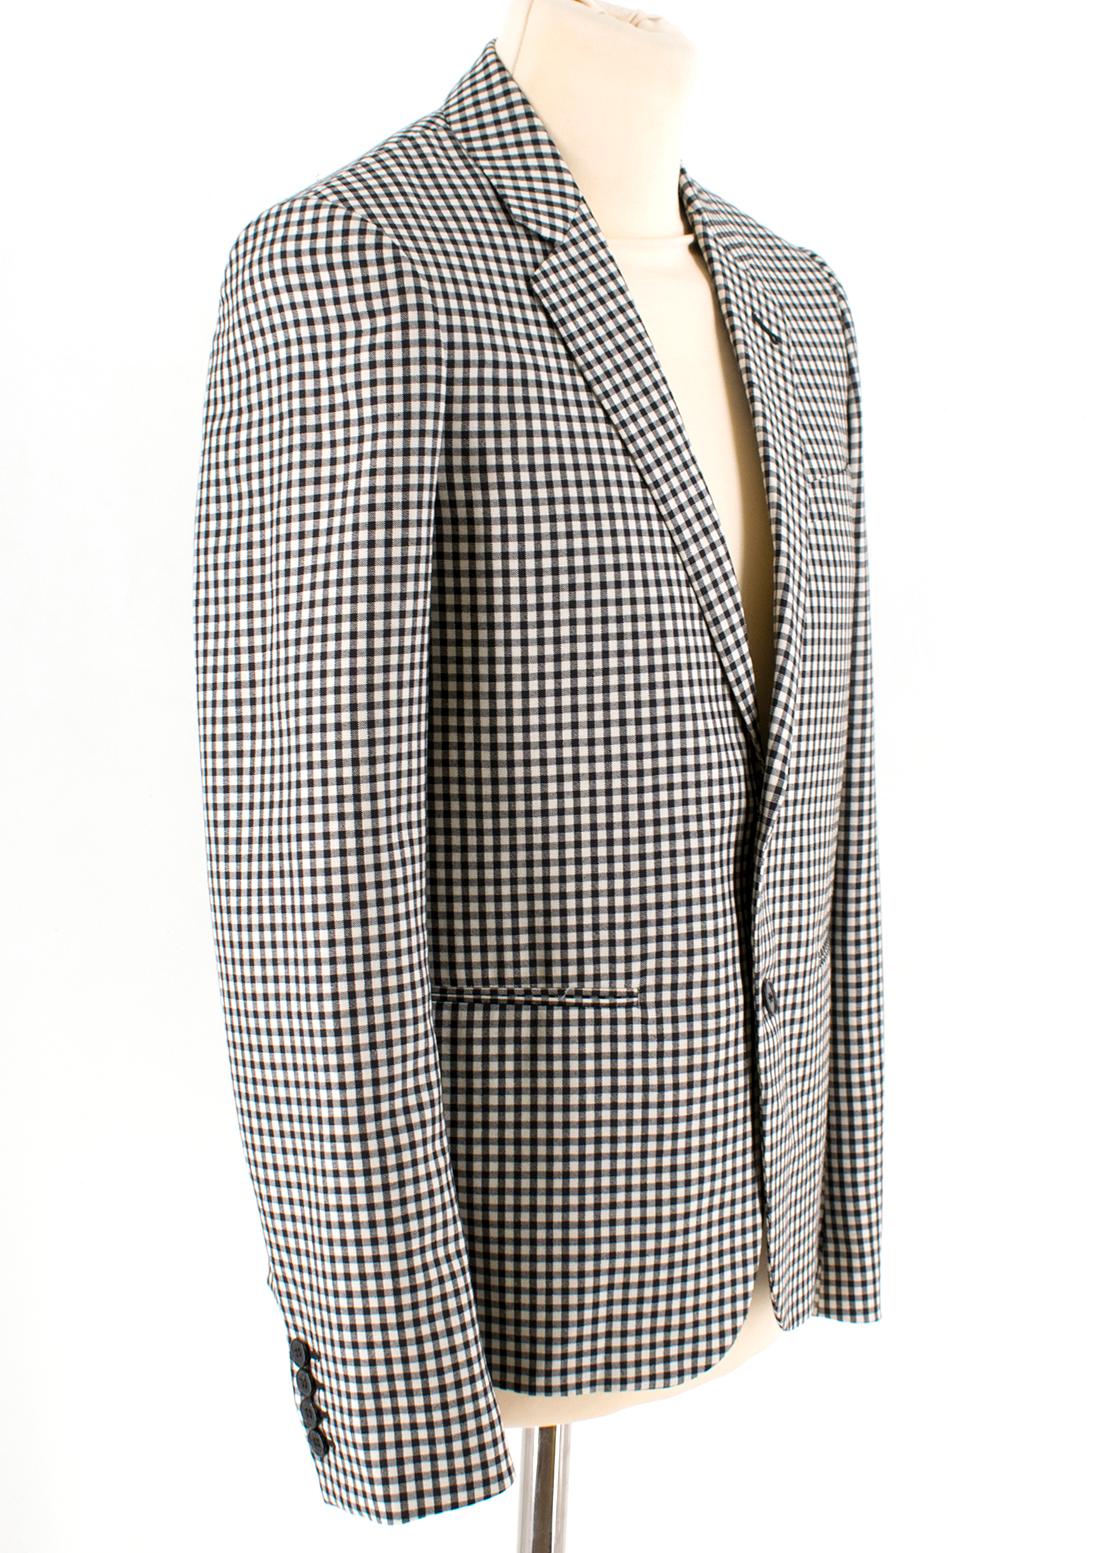 Saint Laurent Gingham Double Breasted Blazer 

Gingham pattern blazer jacket, 
Double-breasted with front button fastening,
Slightly padded shoulders,
Four buttons along the cuffs,
Notched collar,
Long sleeves,
Slit along the hem,
Lightweight